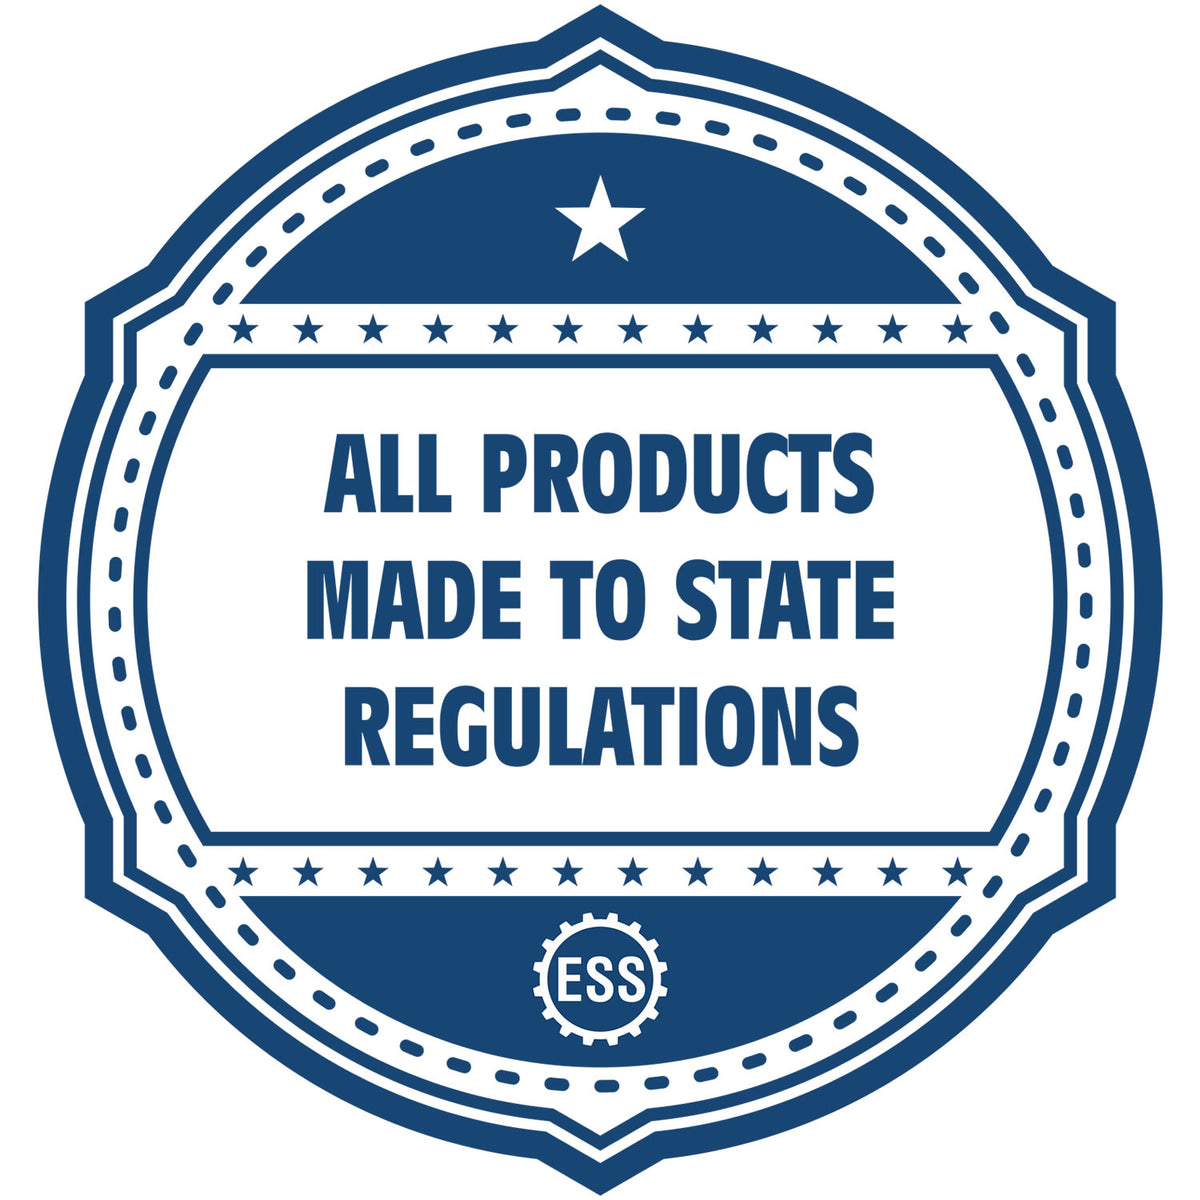 An icon or badge element for the State of Connecticut Long Reach Architectural Embossing Seal showing that this product is made in compliance with state regulations.